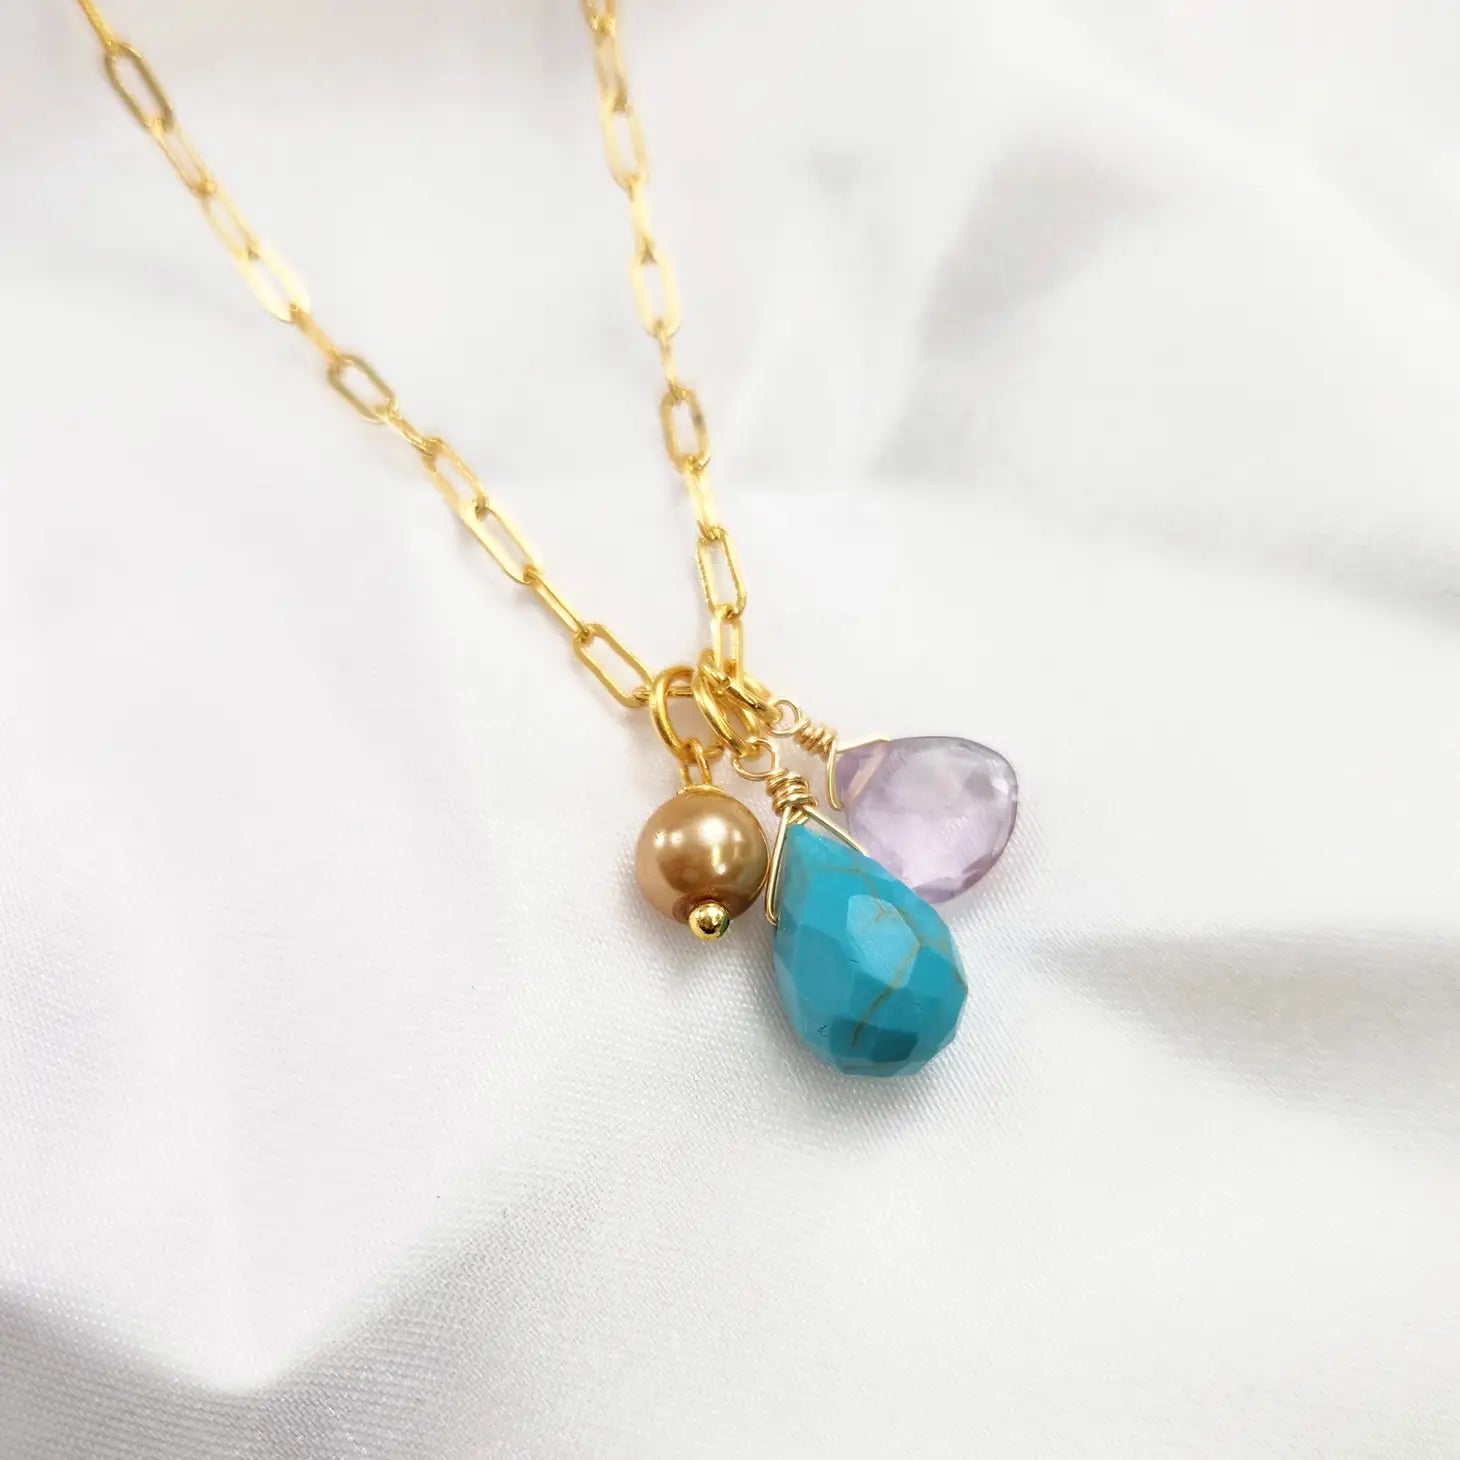 Turquoise Amethyst Necklace